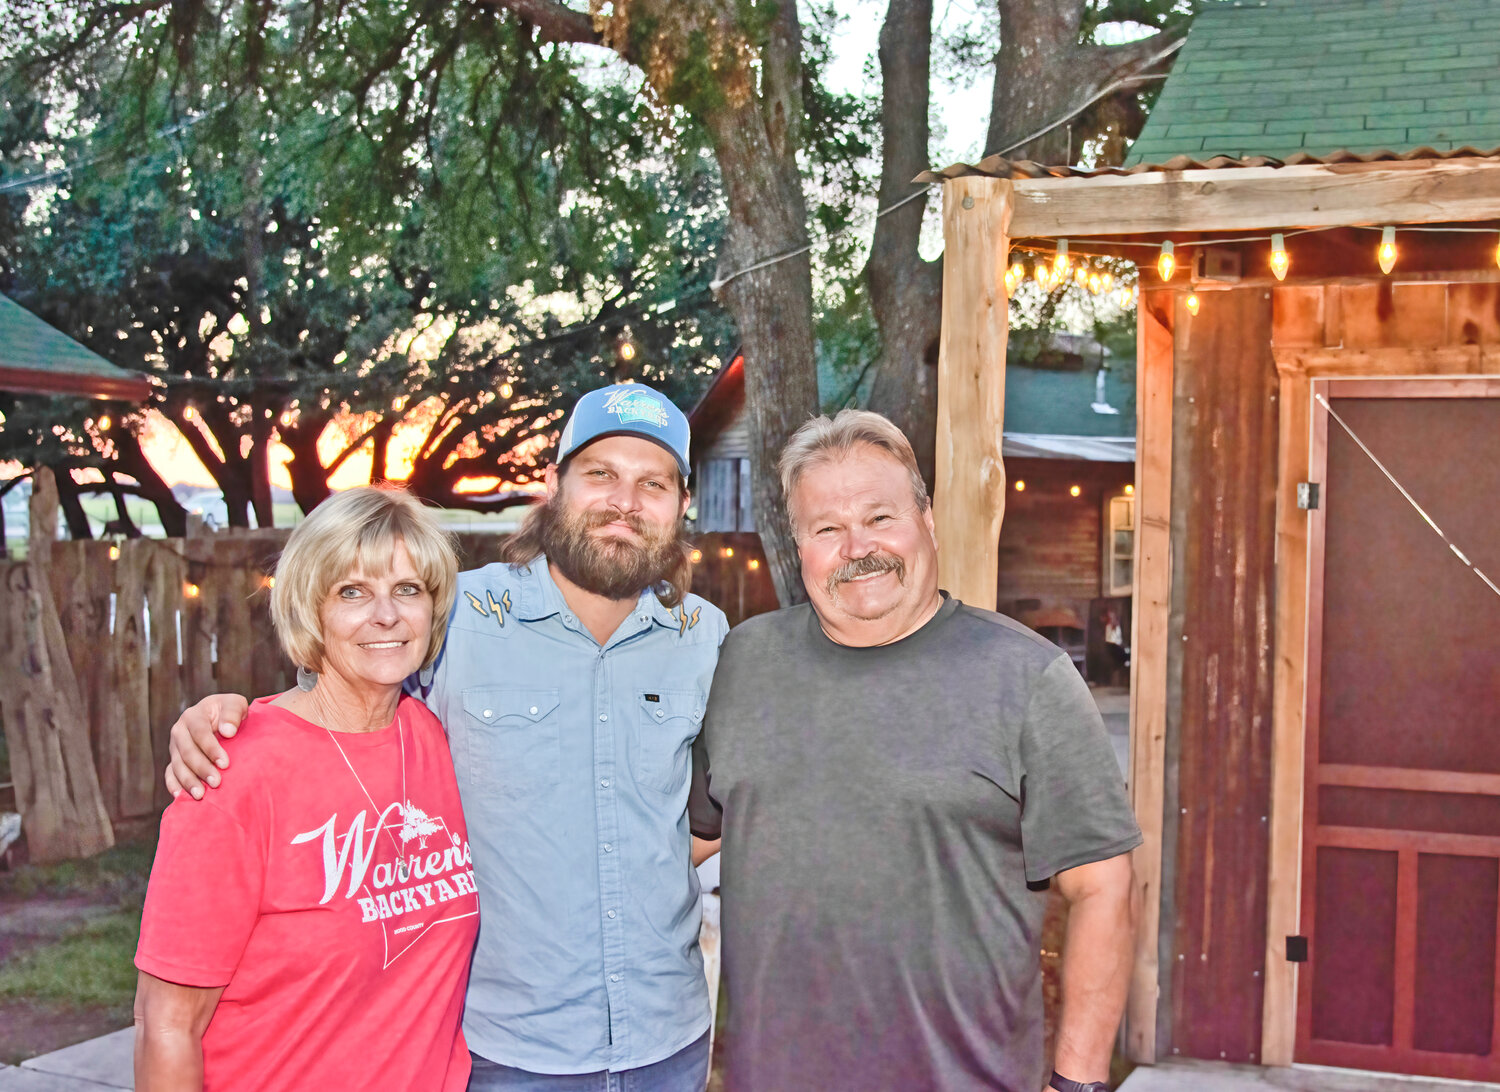 FAMILY ROOTS: The Berry family's roots in Hood County go way back. Here, Brett Berry, center, poses with mom Joni and dad Steve, the previous owners of Warren's Backyard.